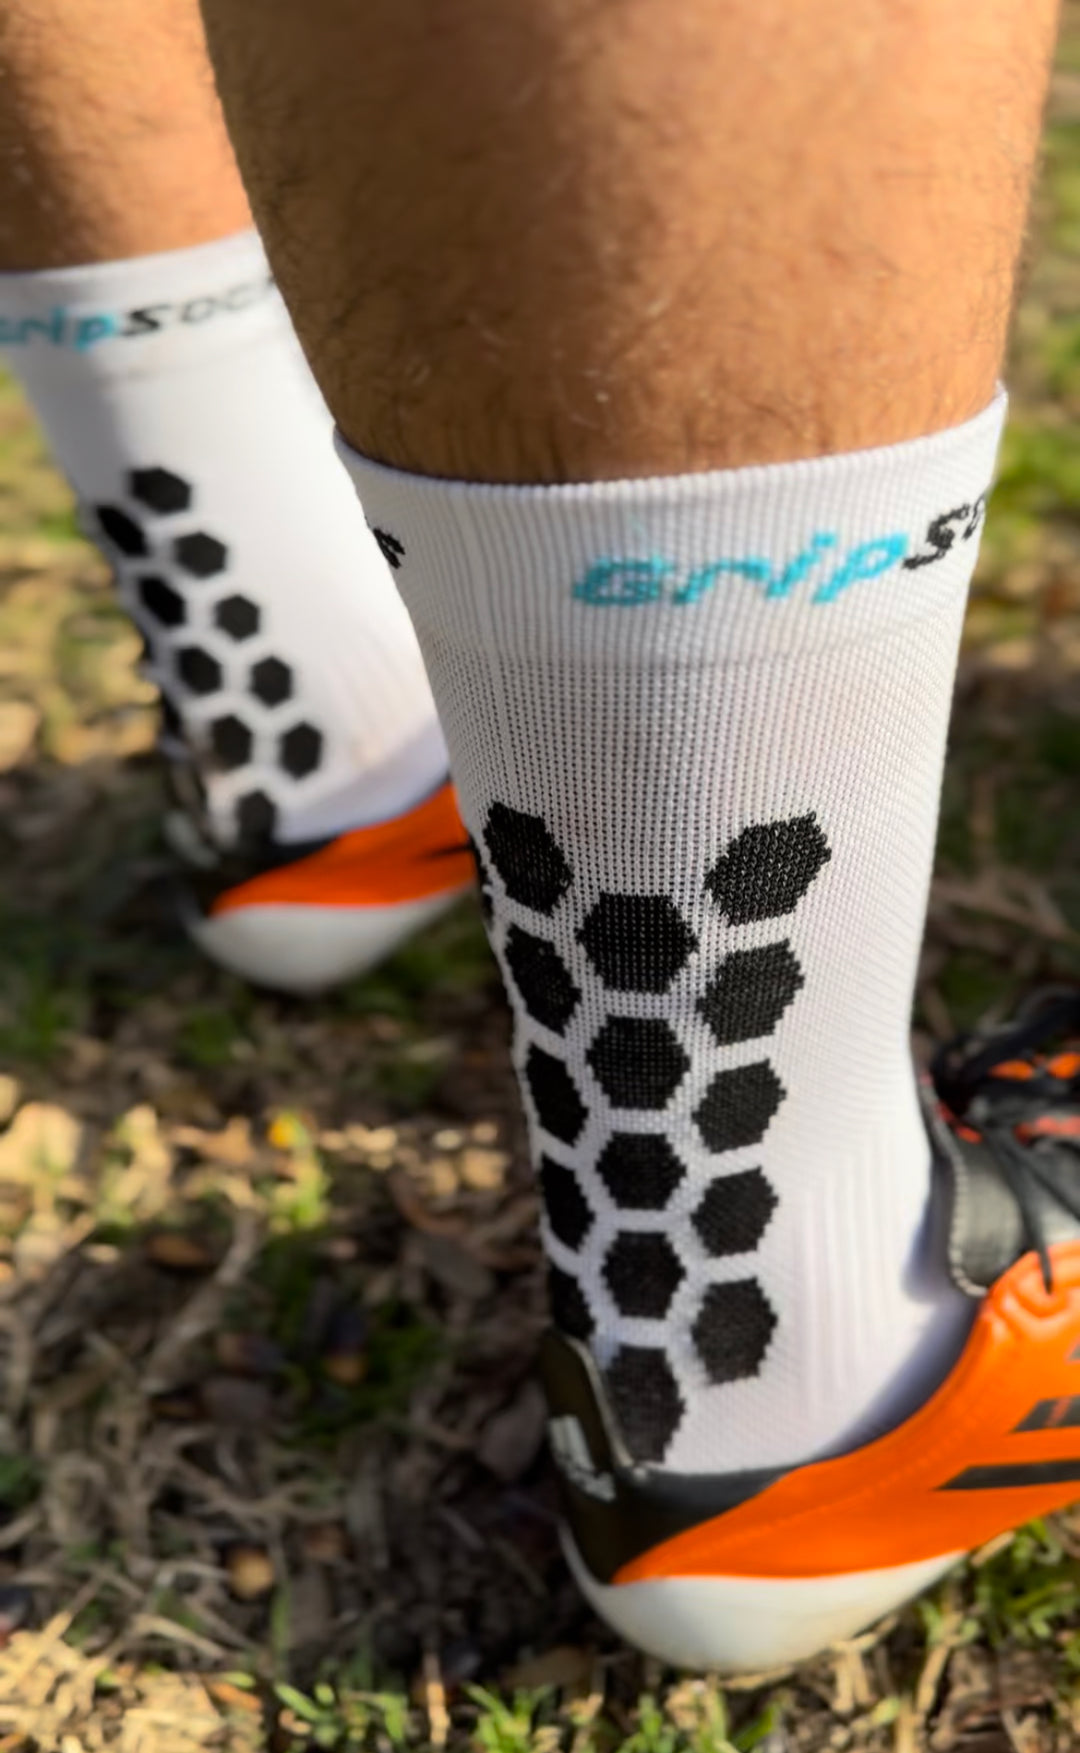 Do GripSocks Actually Improve Soccer Performance? We Have the Answers.